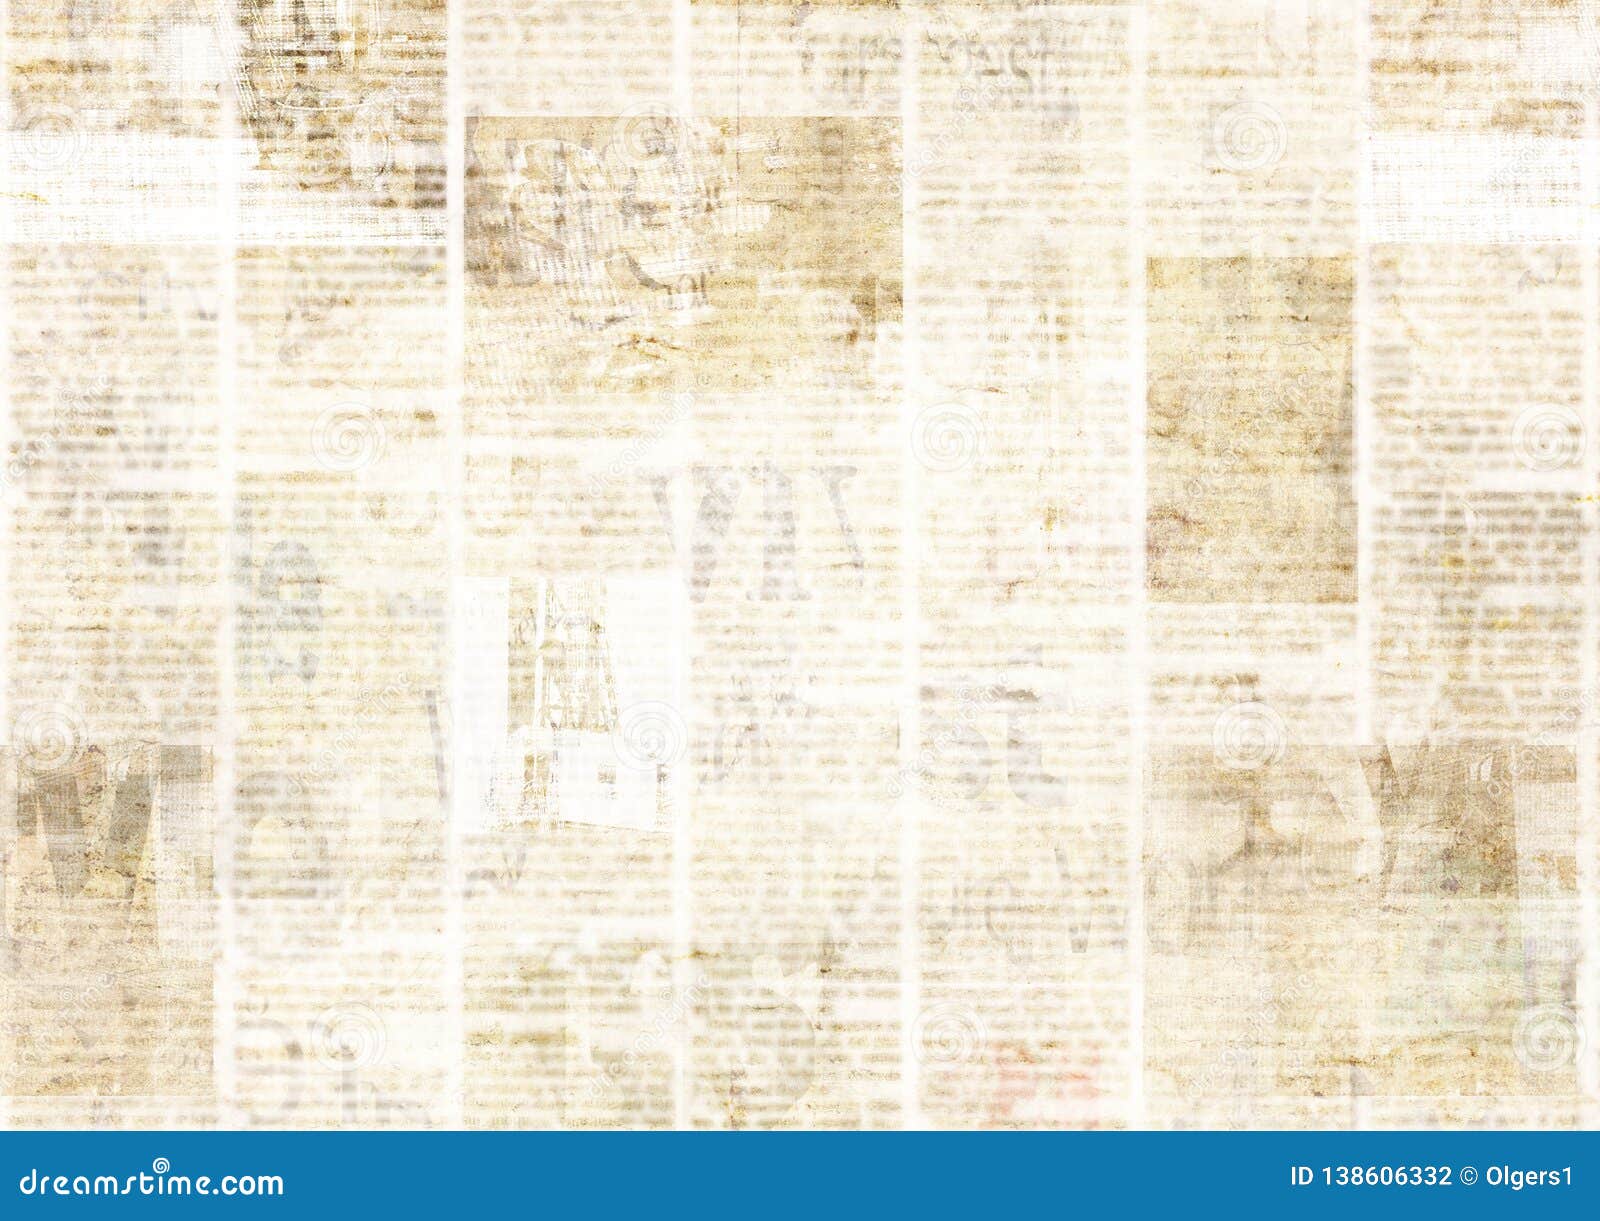 Newspaper With Old Grunge Vintage Unreadable Paper Texture Background Stock Photo Image Of Blank Columns